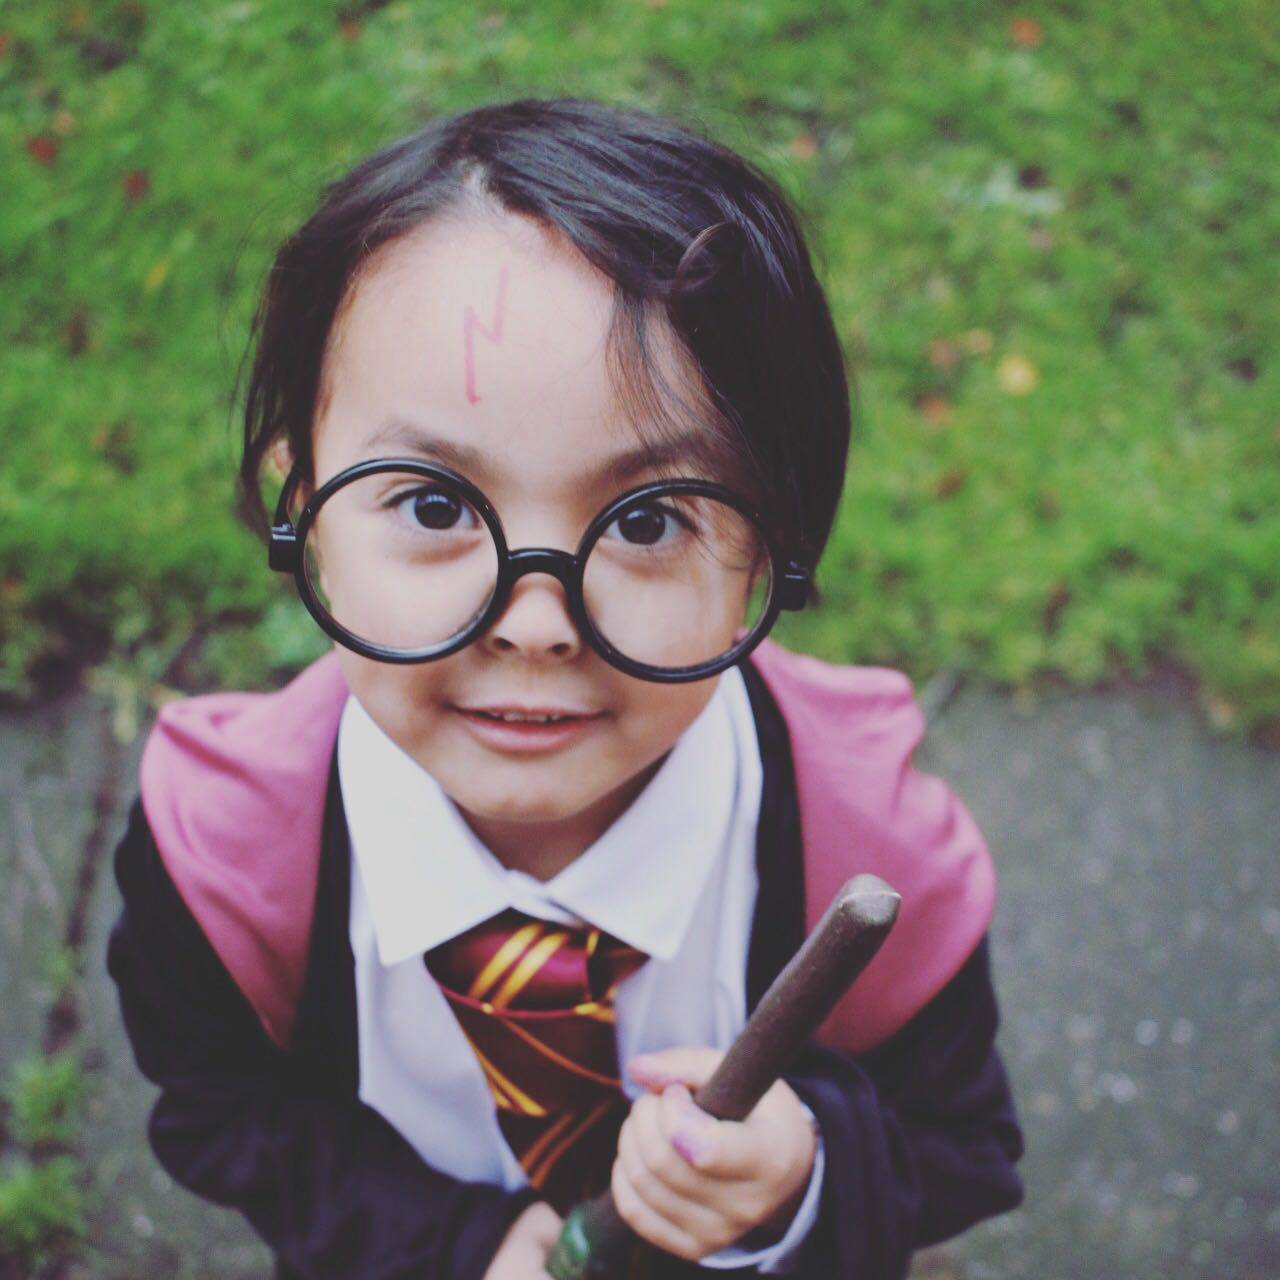 It's nearly World Book Day - if you're struggling to think of anything for your kids to dress up as, check out these easy kids costume ideas!